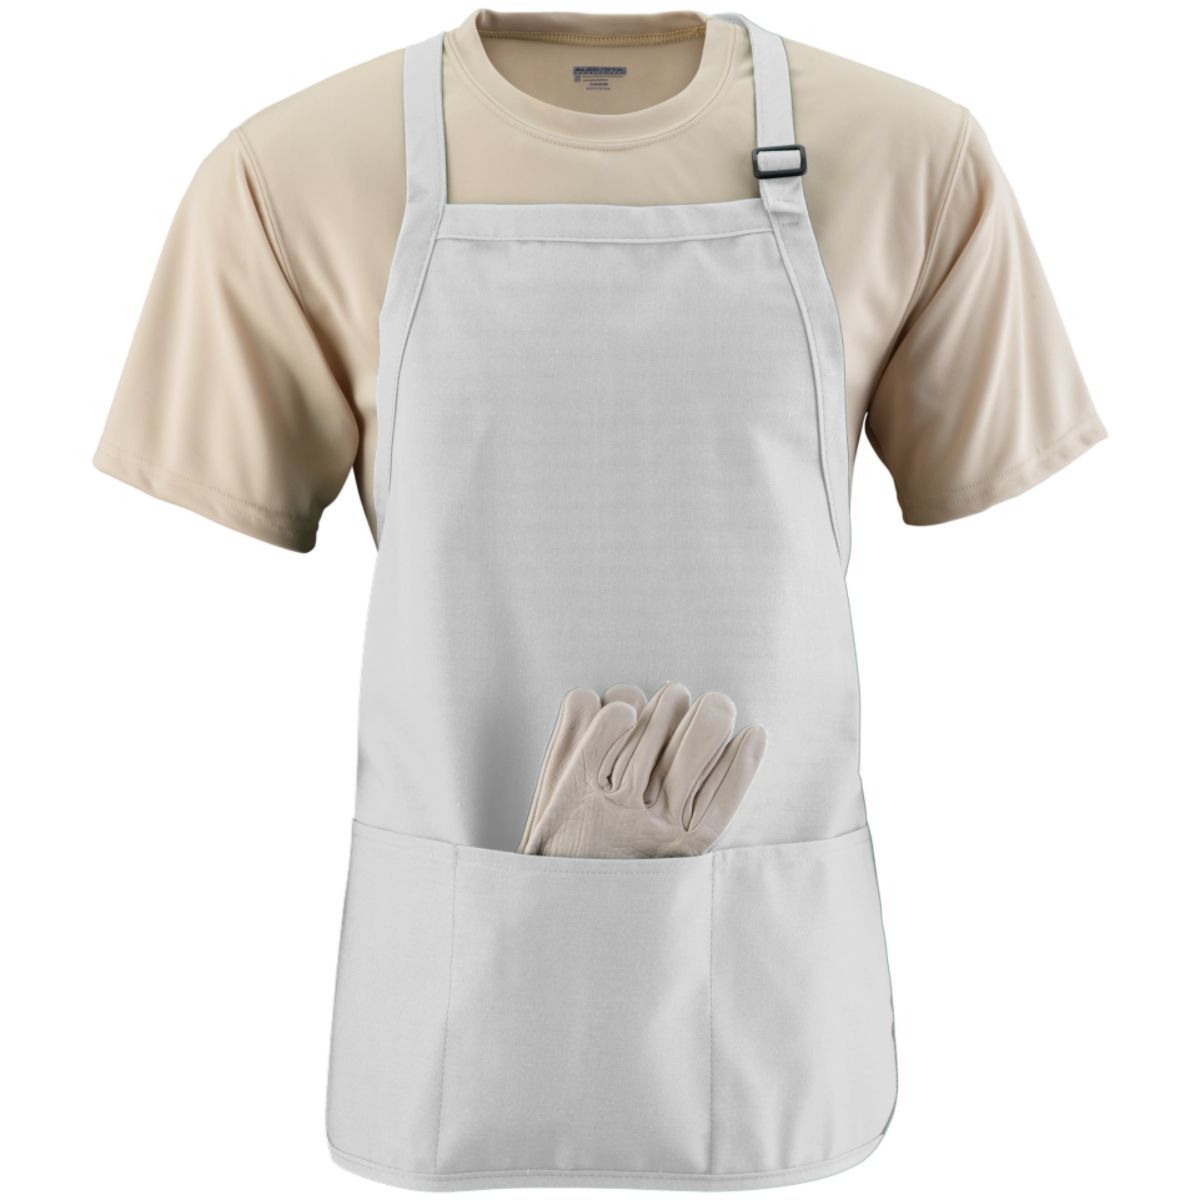 Medium Length Apron With Pouch 4250